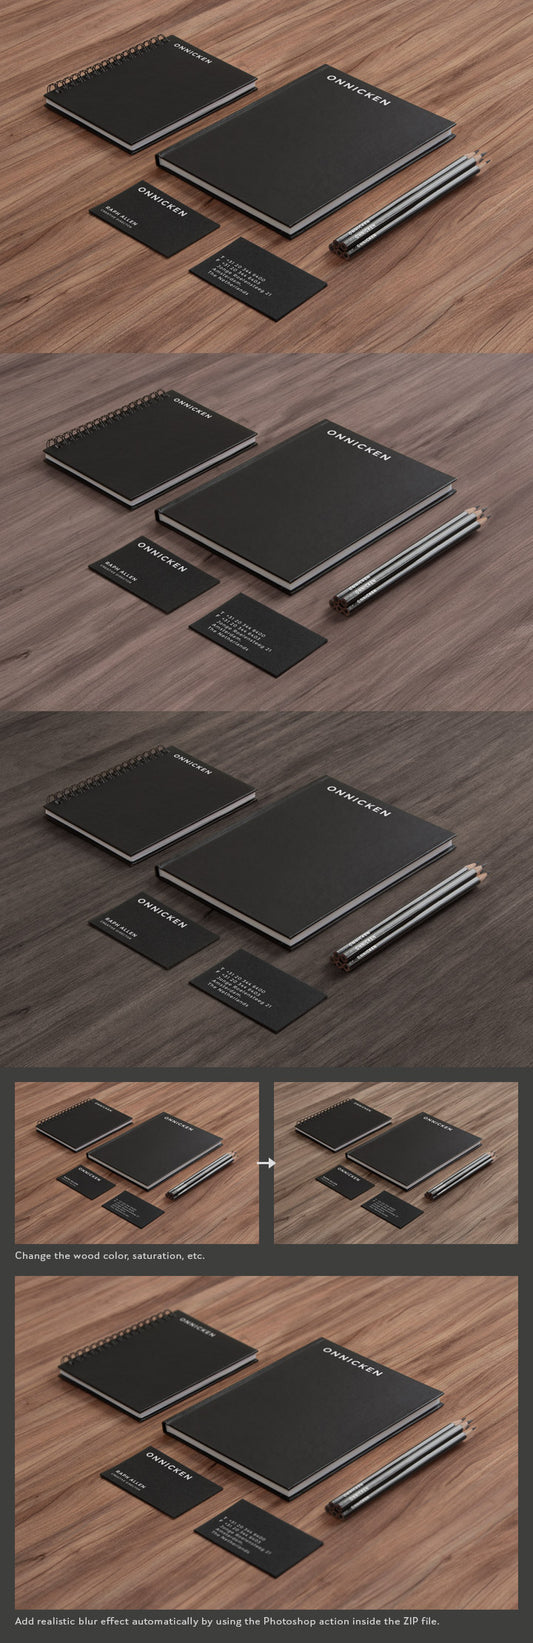 Free Business Scene with Business Card and Notebook Mockups